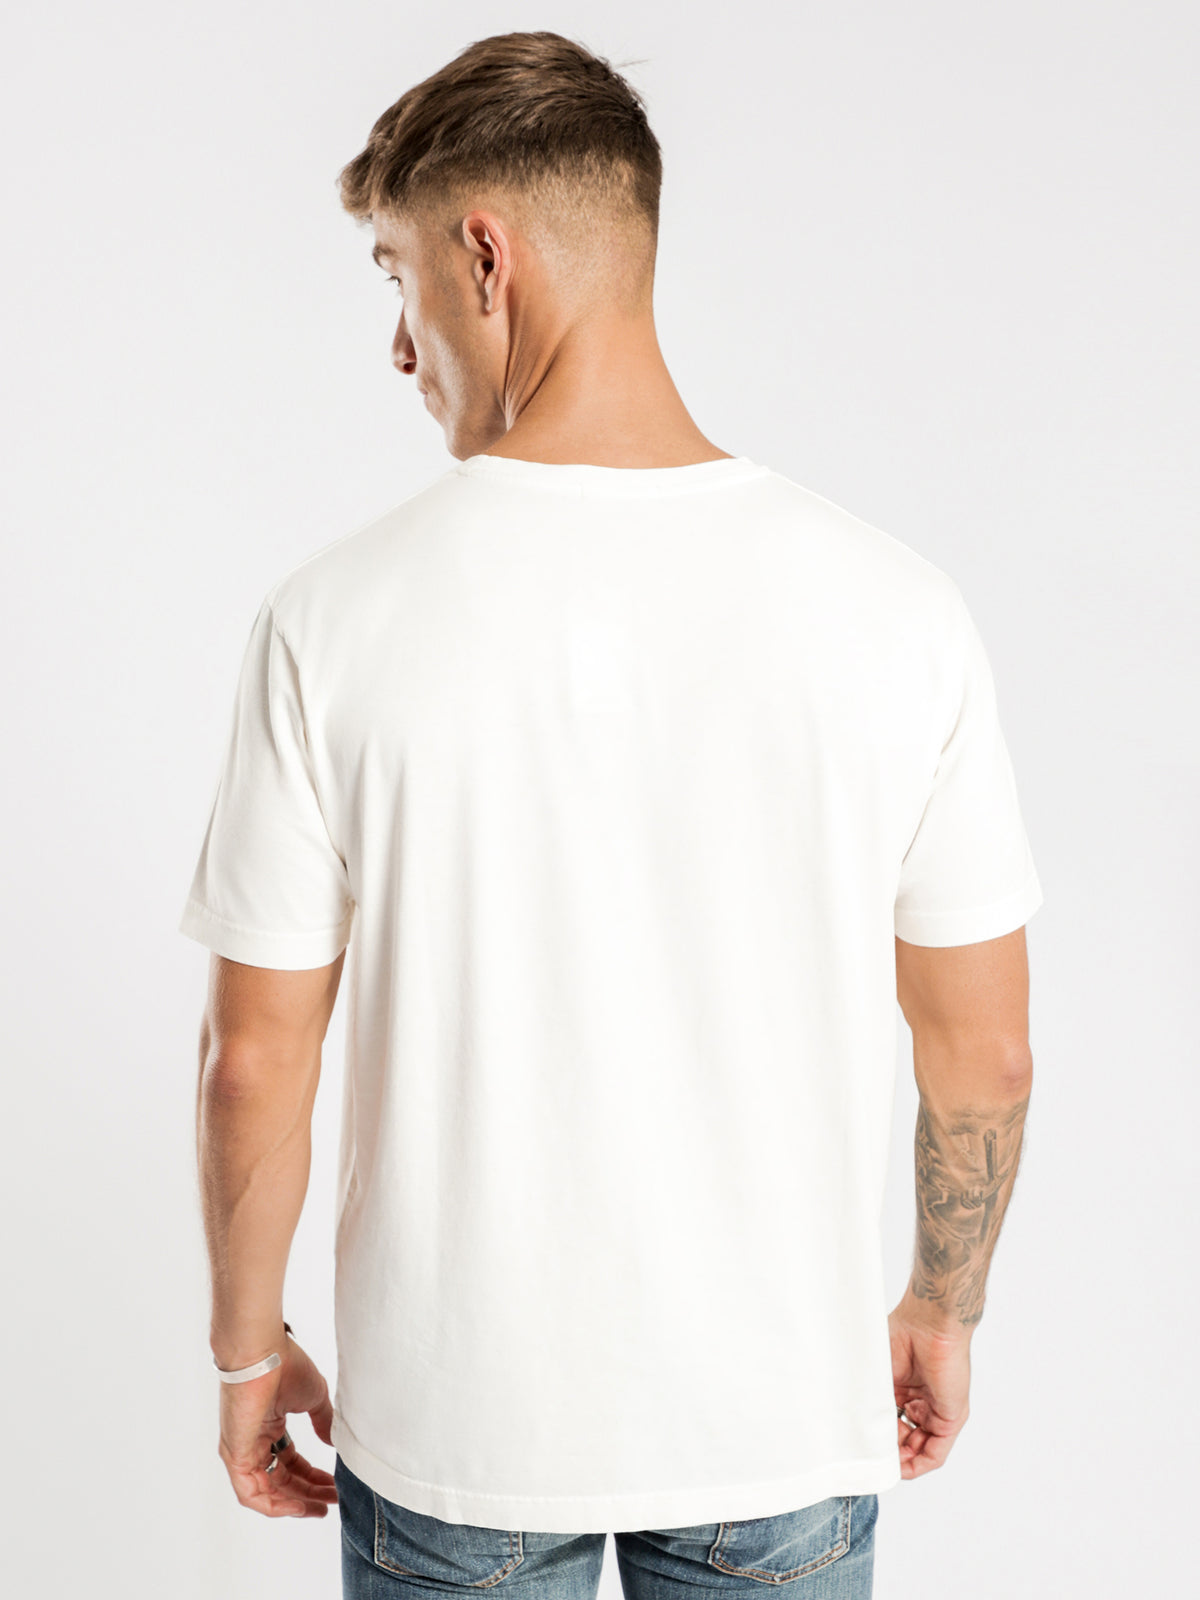 Uno Njco Circle T-Shirt in Dusty White